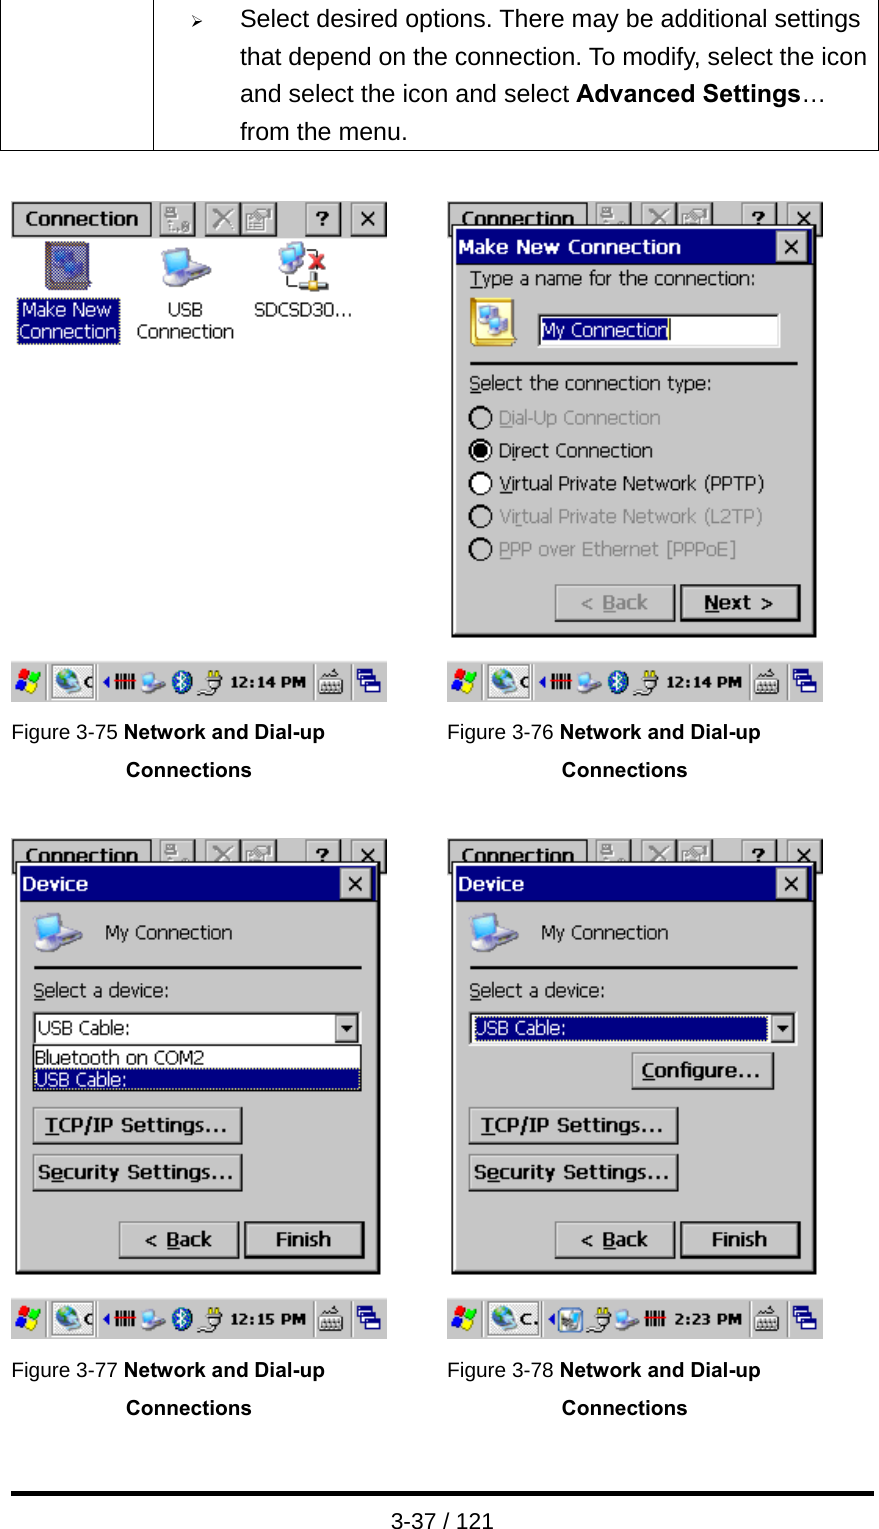  3-37 / 121 ¾ Select desired options. There may be additional settings that depend on the connection. To modify, select the icon and select the icon and select Advanced Settings… from the menu.     Figure 3-75 Network and Dial-up Connections Figure 3-76 Network and Dial-up Connections      Figure 3-77 Network and Dial-up Connections Figure 3-78 Network and Dial-up Connections 